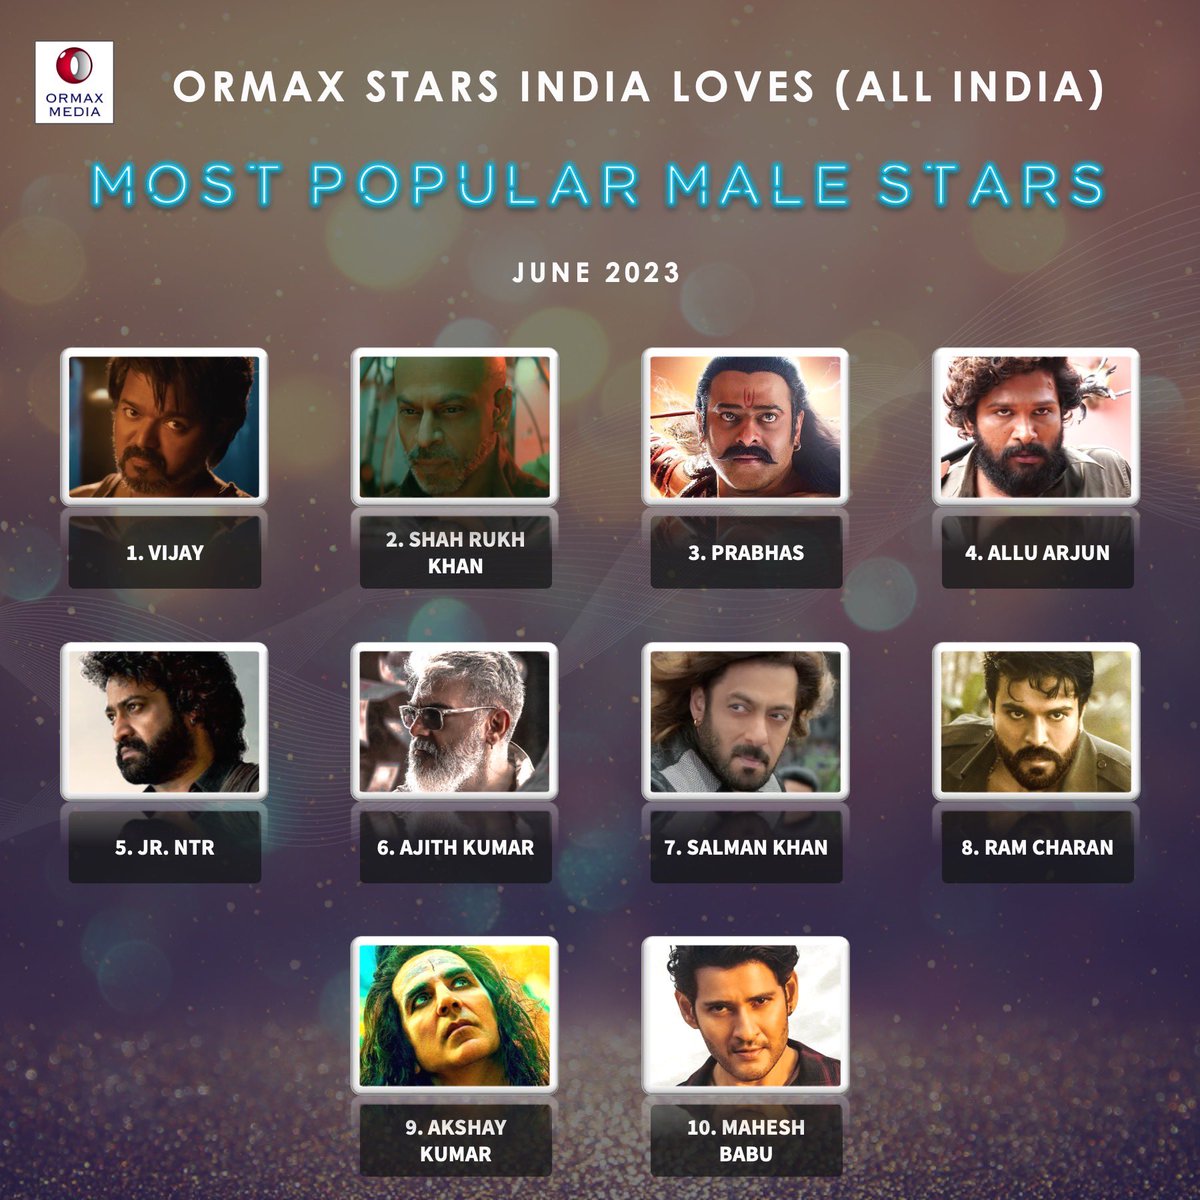 RT @PeaceBrwVJ: Thalapathy VIJAY Again Tops in the List of Most popular male Stars in India !! https://t.co/qpZKdyYfLI